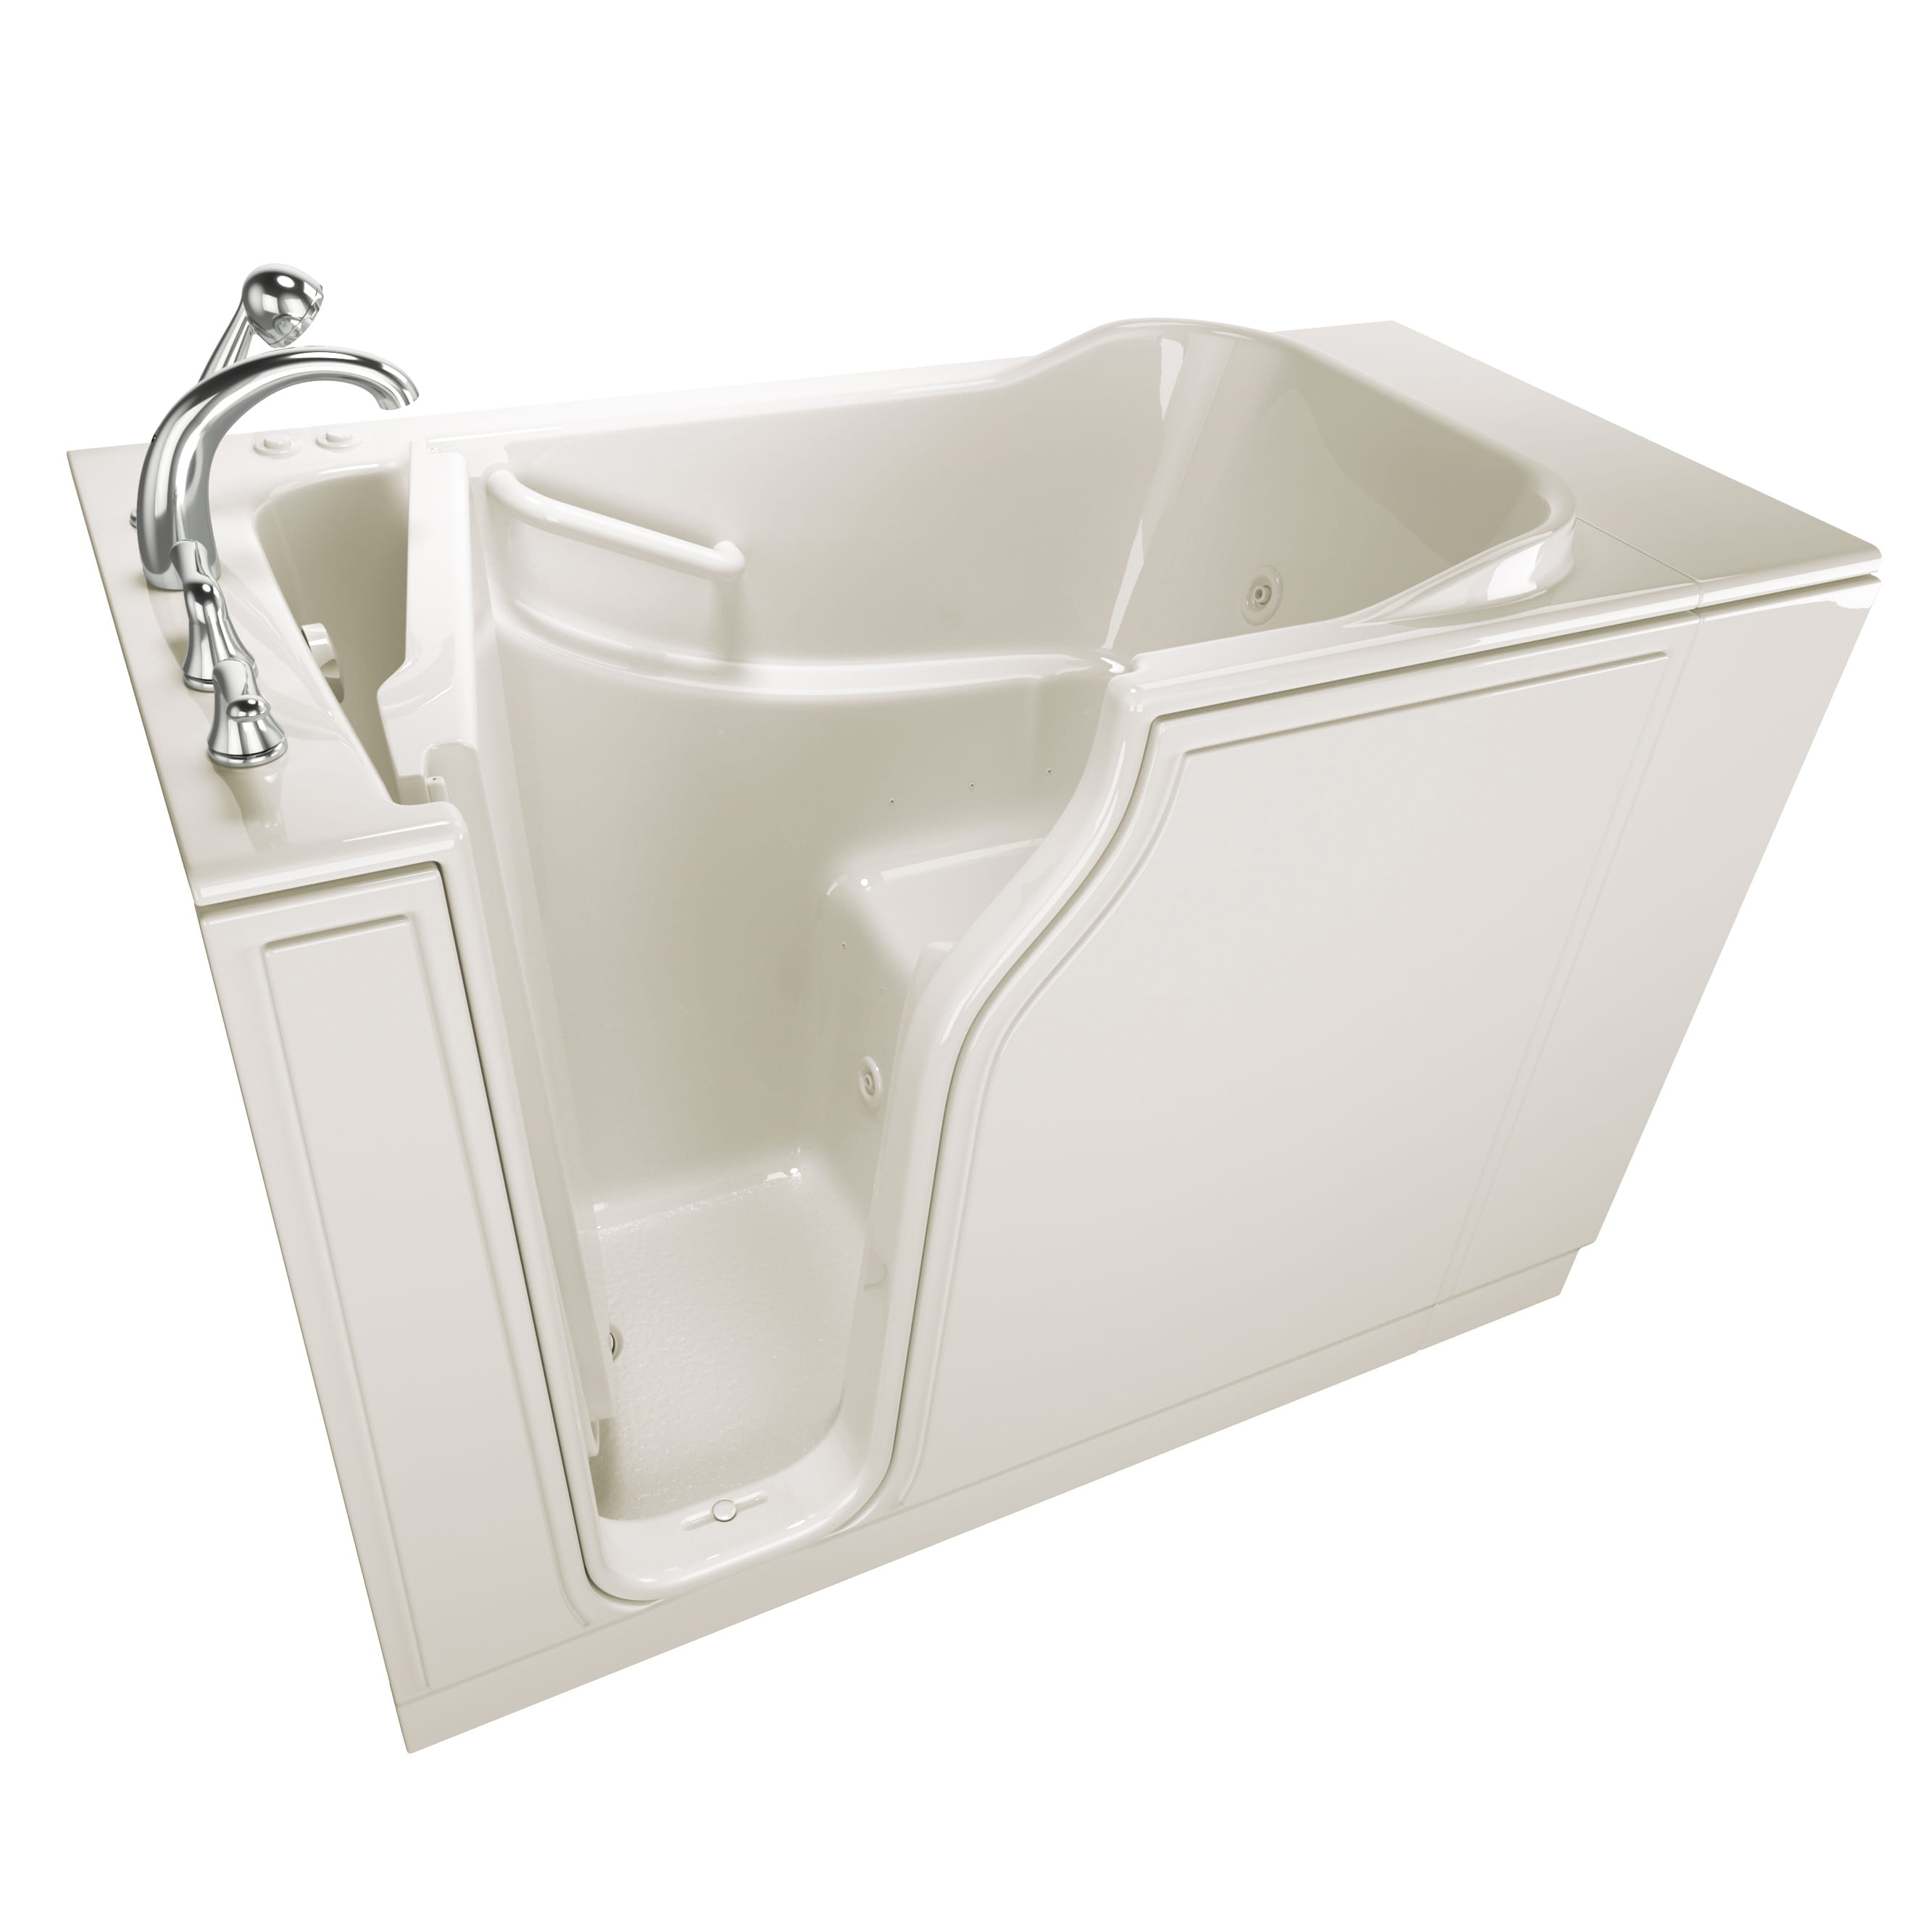 Gelcoat Entry Series 52 x 30-Inch Walk-In Tub With Combination Air Spa and Whirlpool Systems – Left-Hand Drain With Faucet